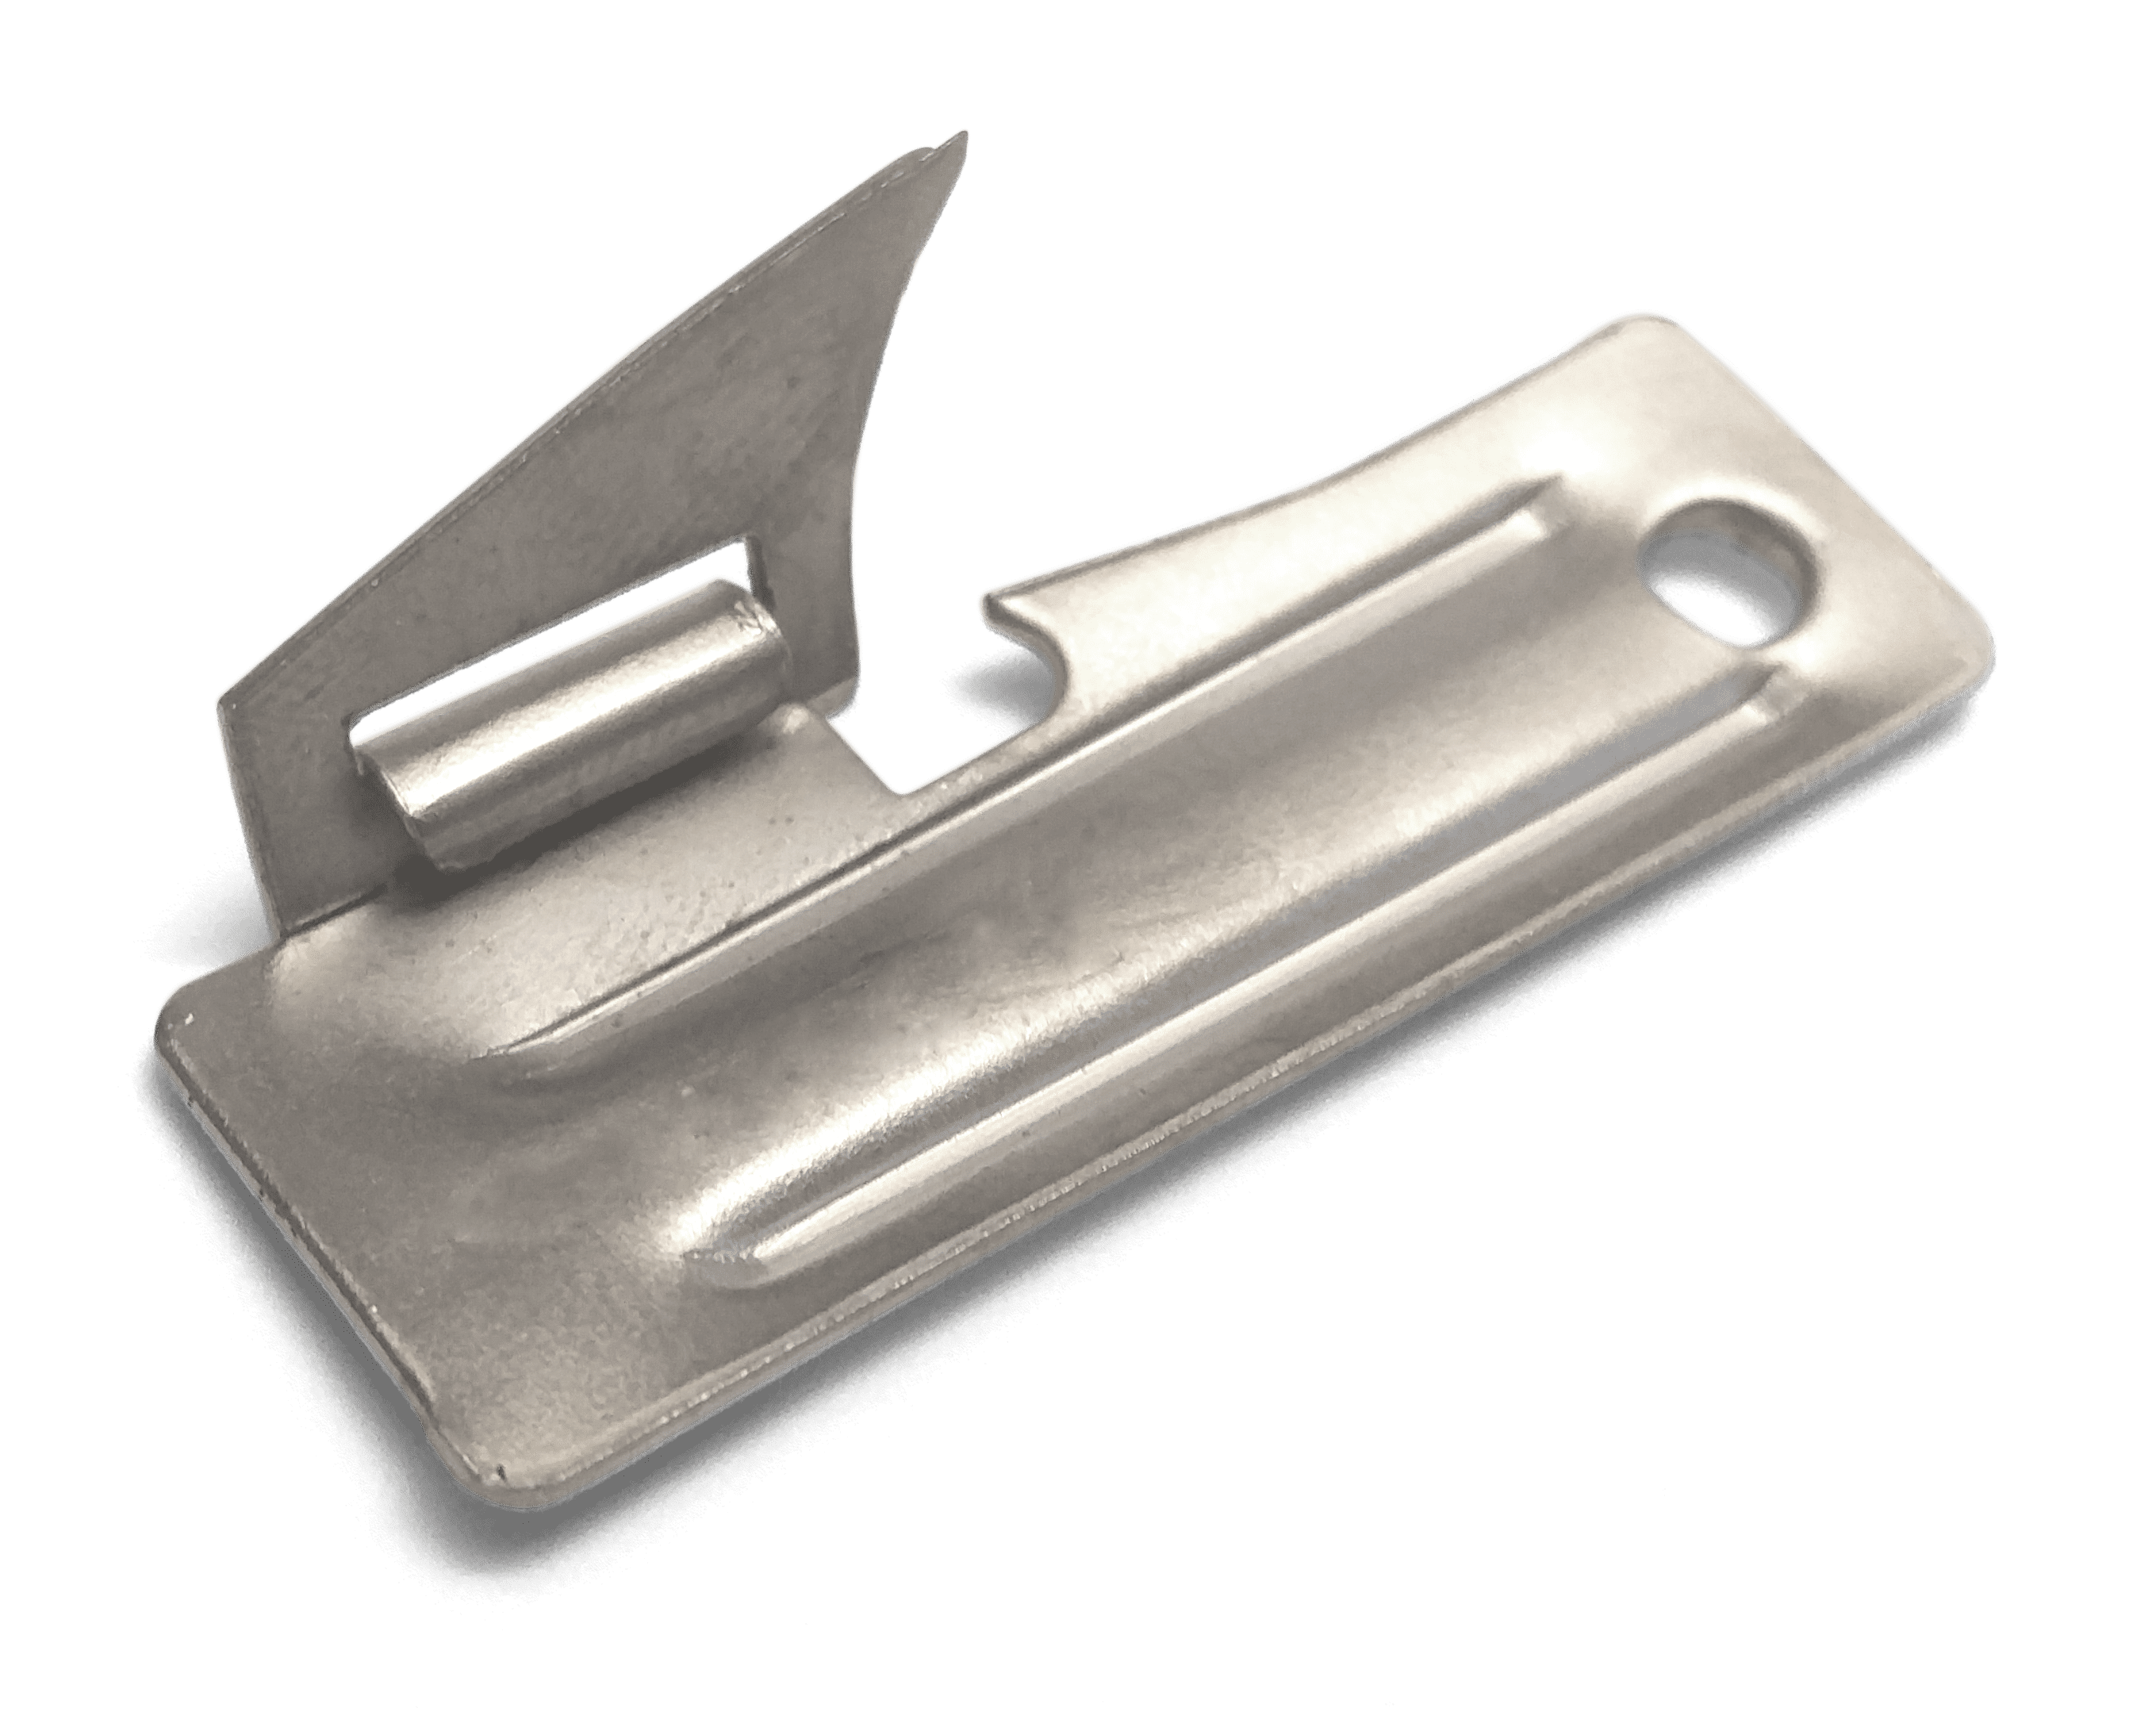 Nickel Plated Steel Bottle or Can Punch Opener 7" Free Shipping USA Only 